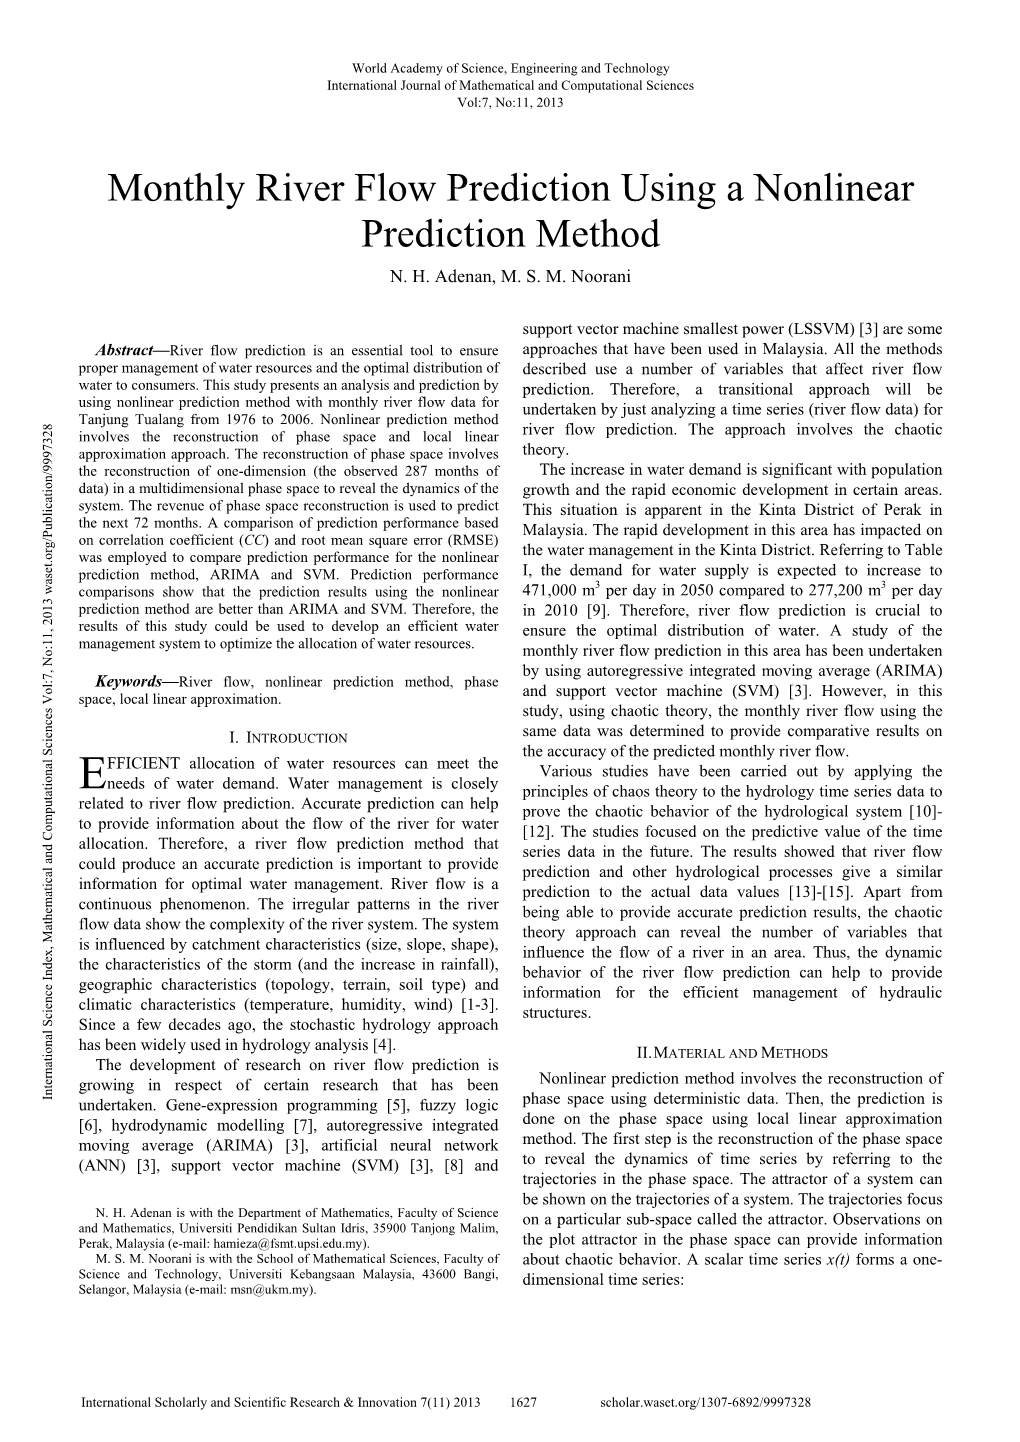 Monthly River Flow Prediction Using a Nonlinear Prediction Method N